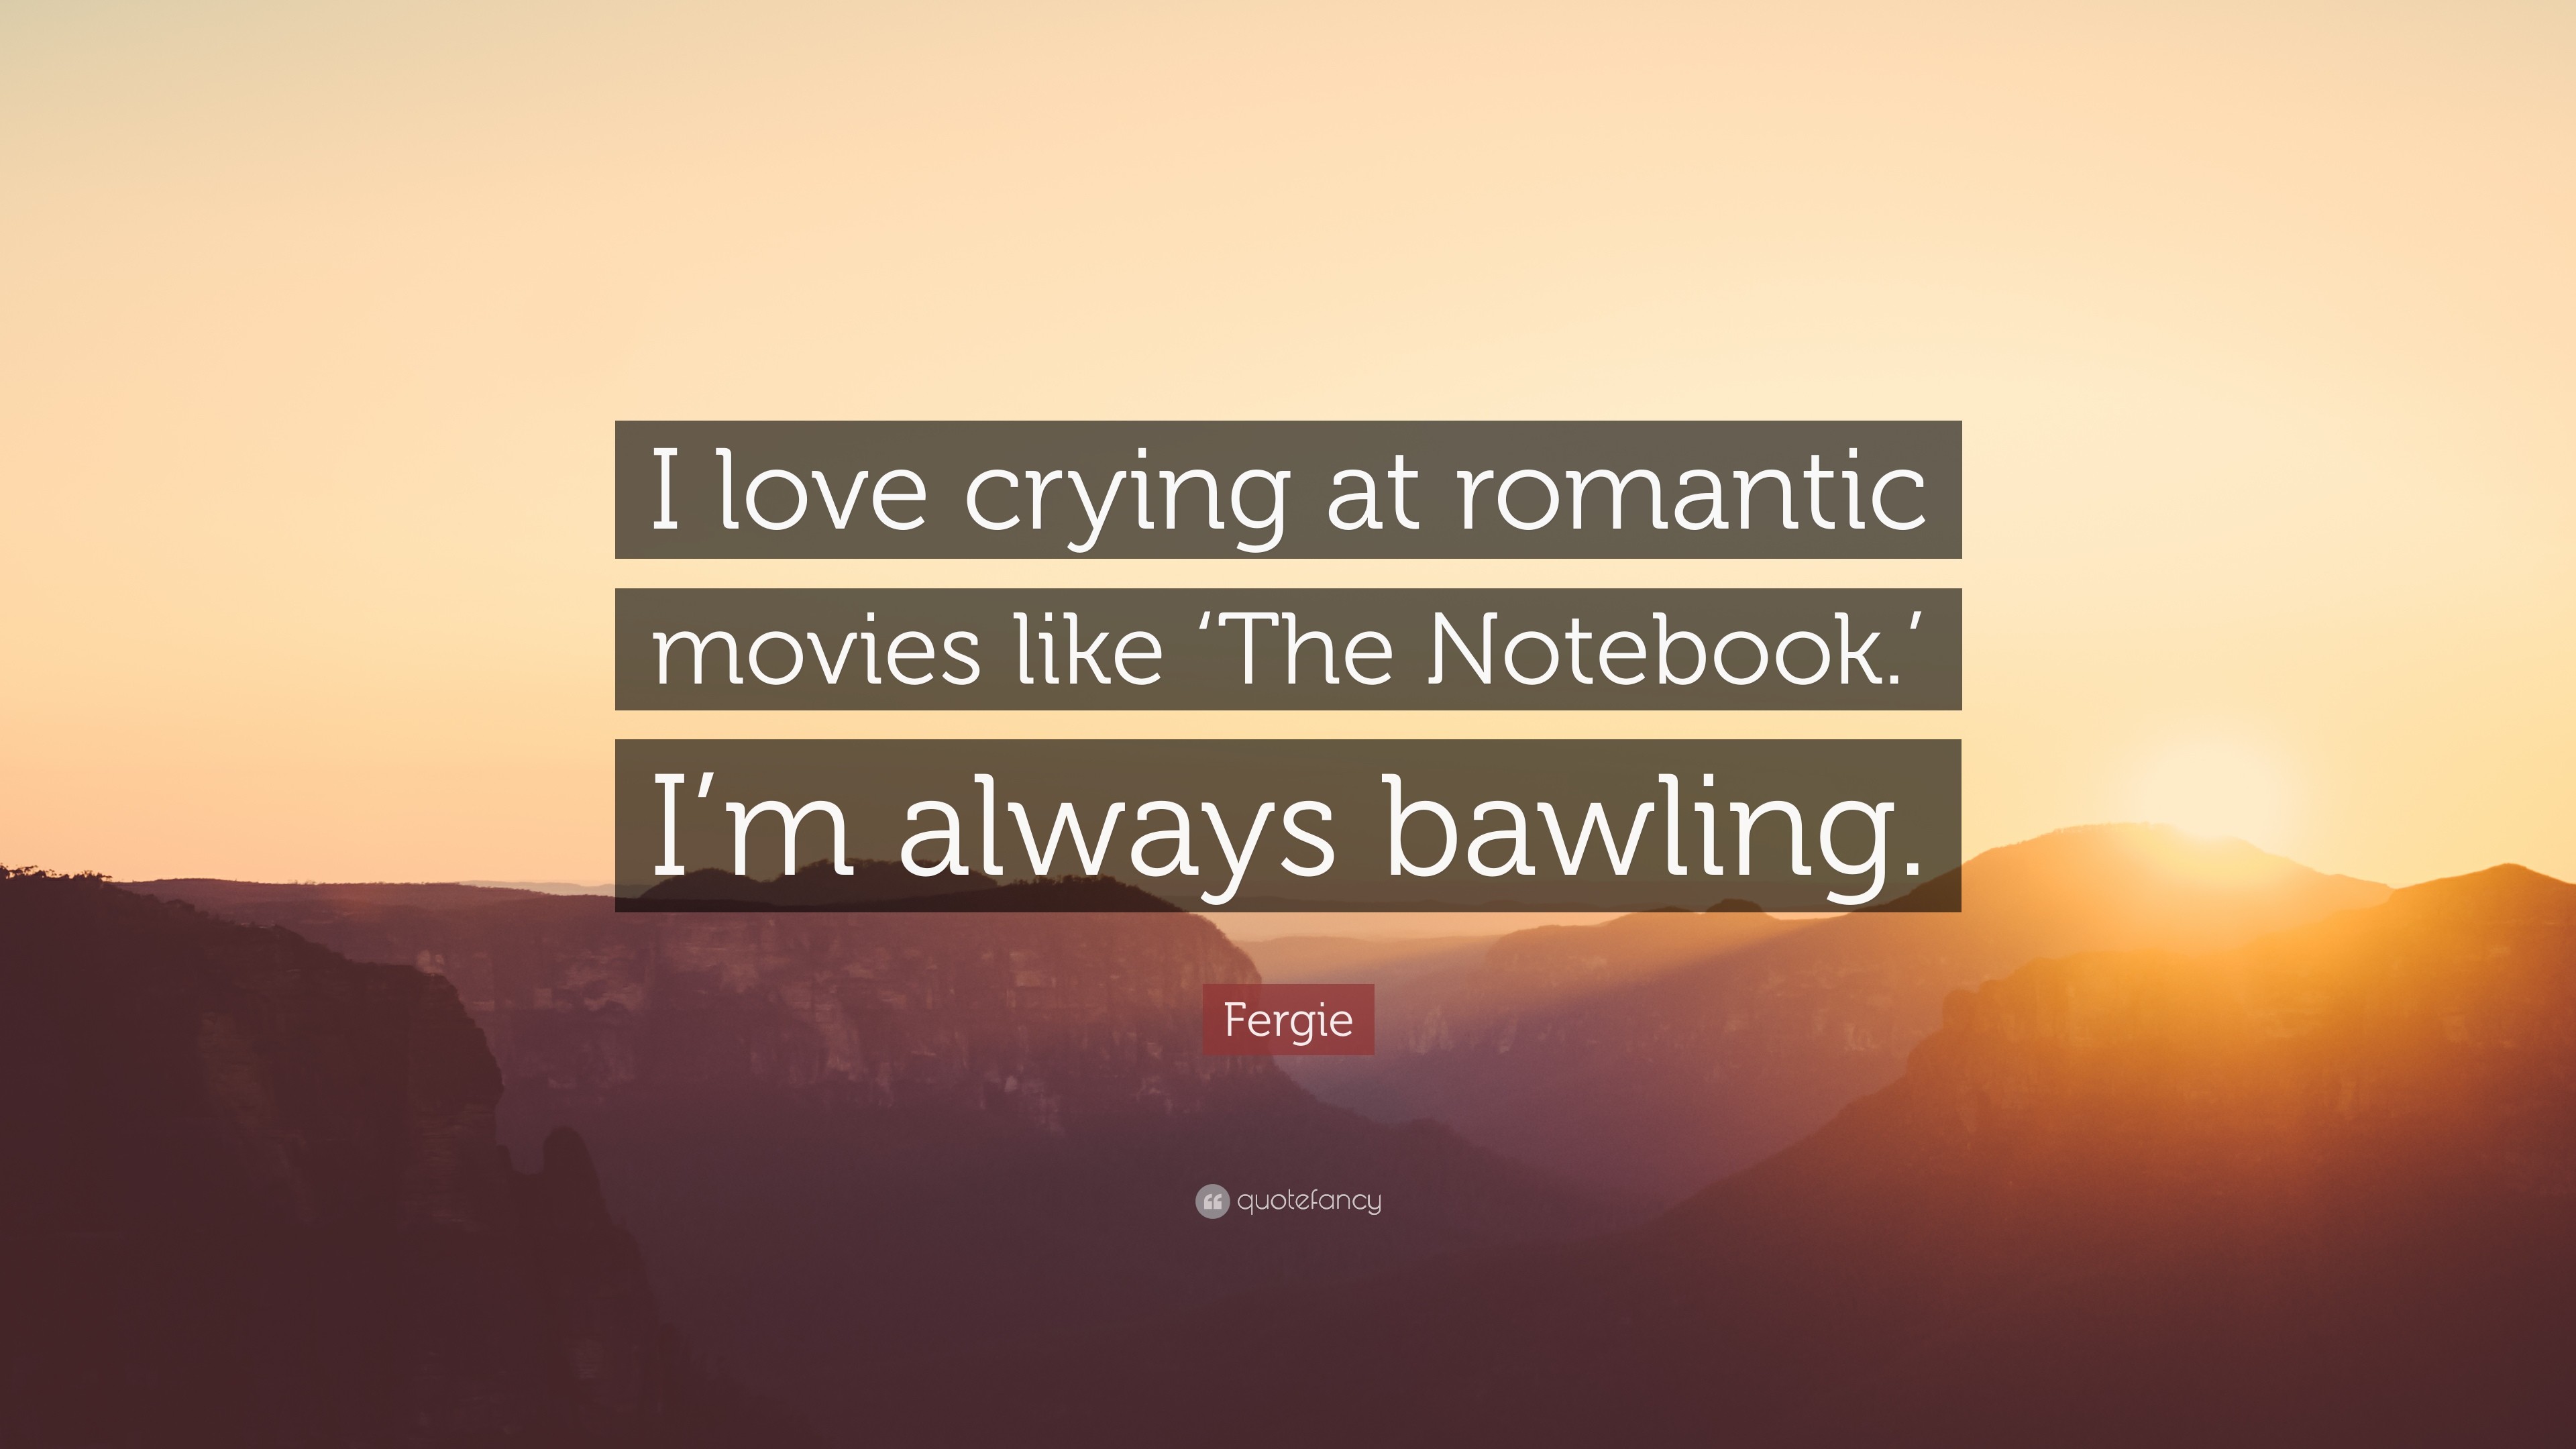 3840x2160 Fergie Quote: “I love crying at romantic movies like 'The Notebook.'